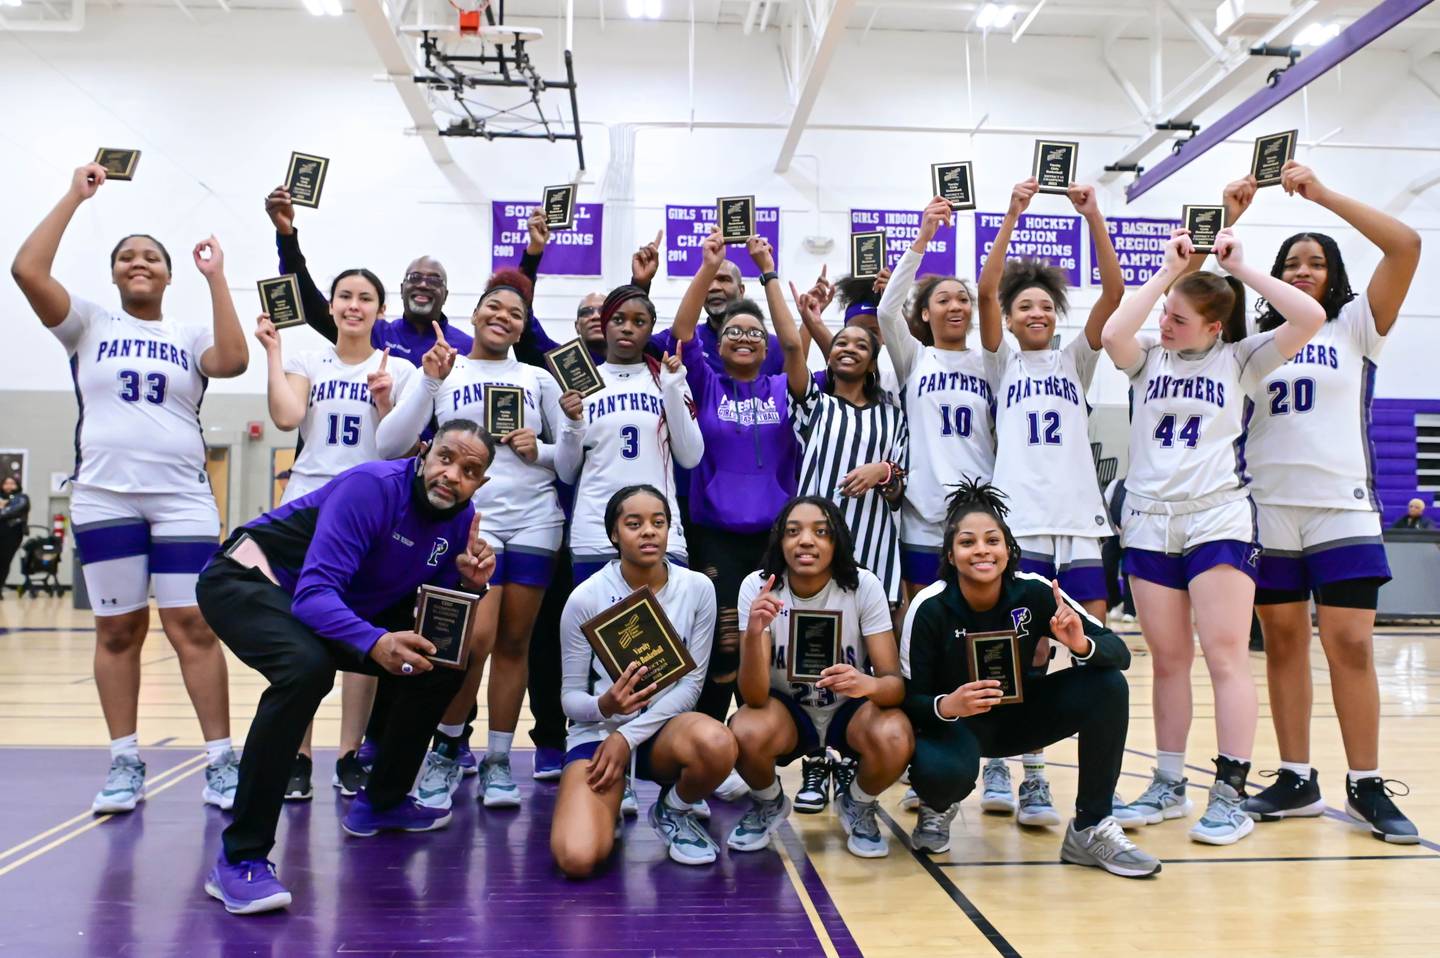 The Pikesville girls basketball teams celebrates its third Baltimore County girls basketball championship in the last five years.